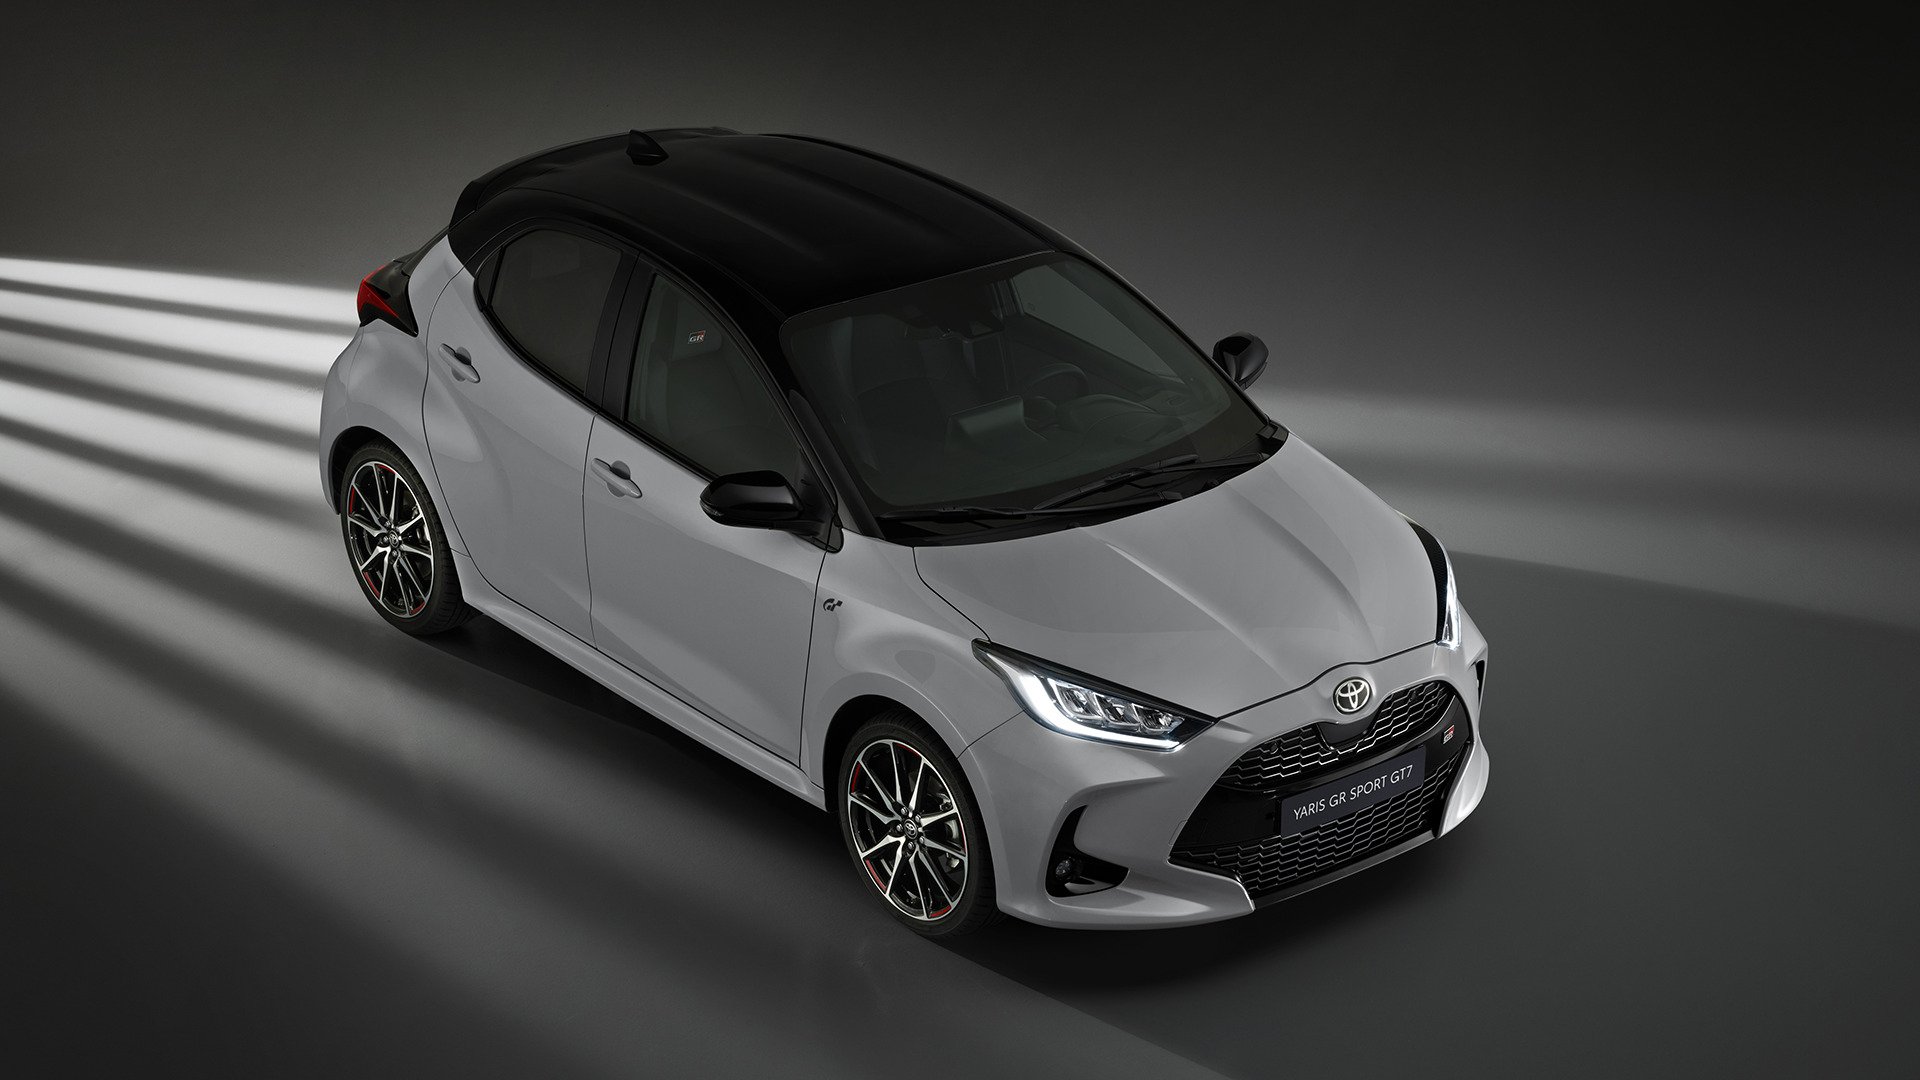 Gran Turismo 7 Special Edition Toyota Yaris Revealed, Limited to 100 Units  – GTPlanet